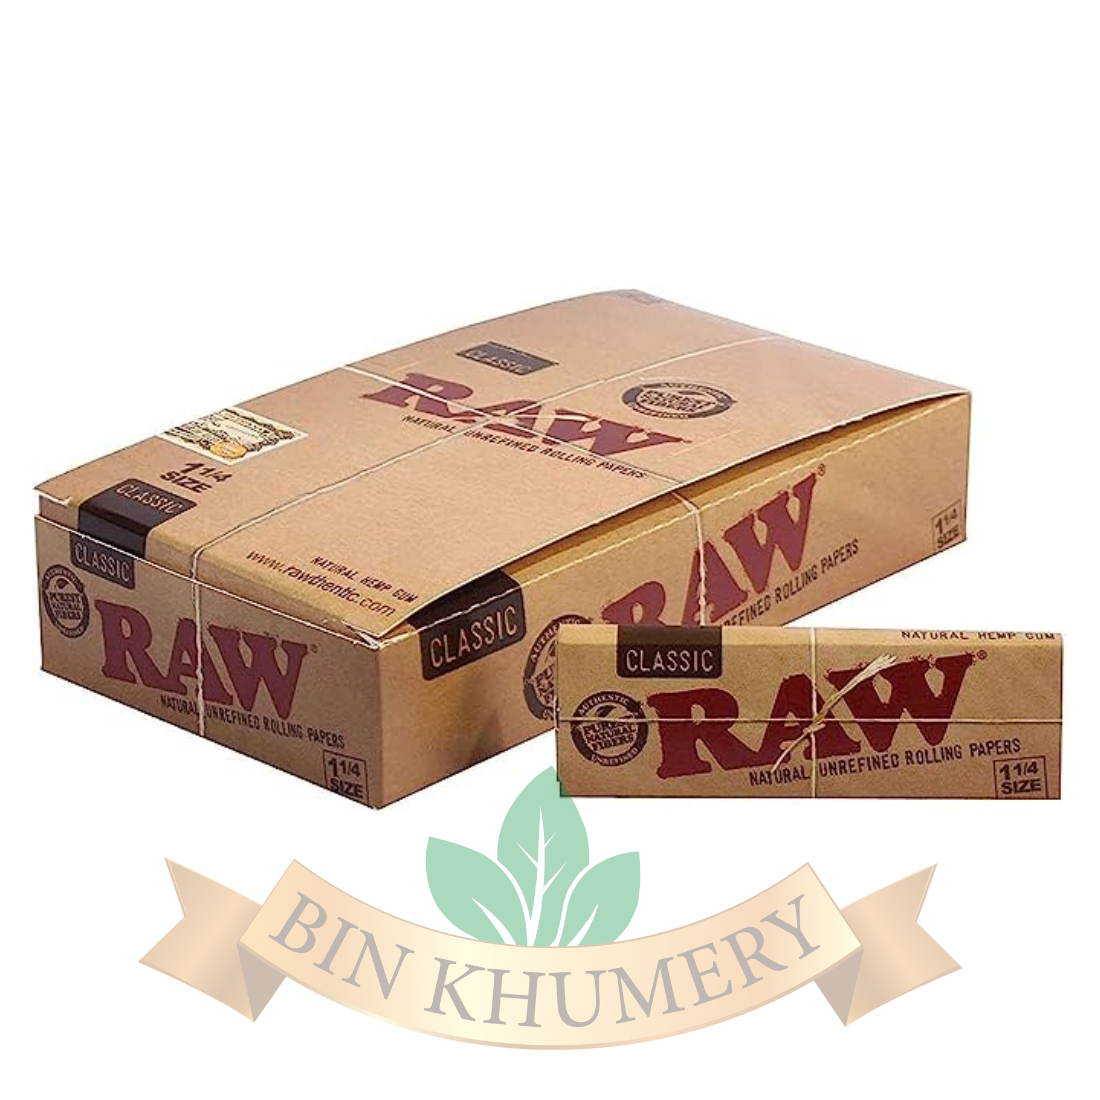 Cartine RAW nere classiche singole larghe doppie -  your B2B  Supplier of CBD and Hemp Products